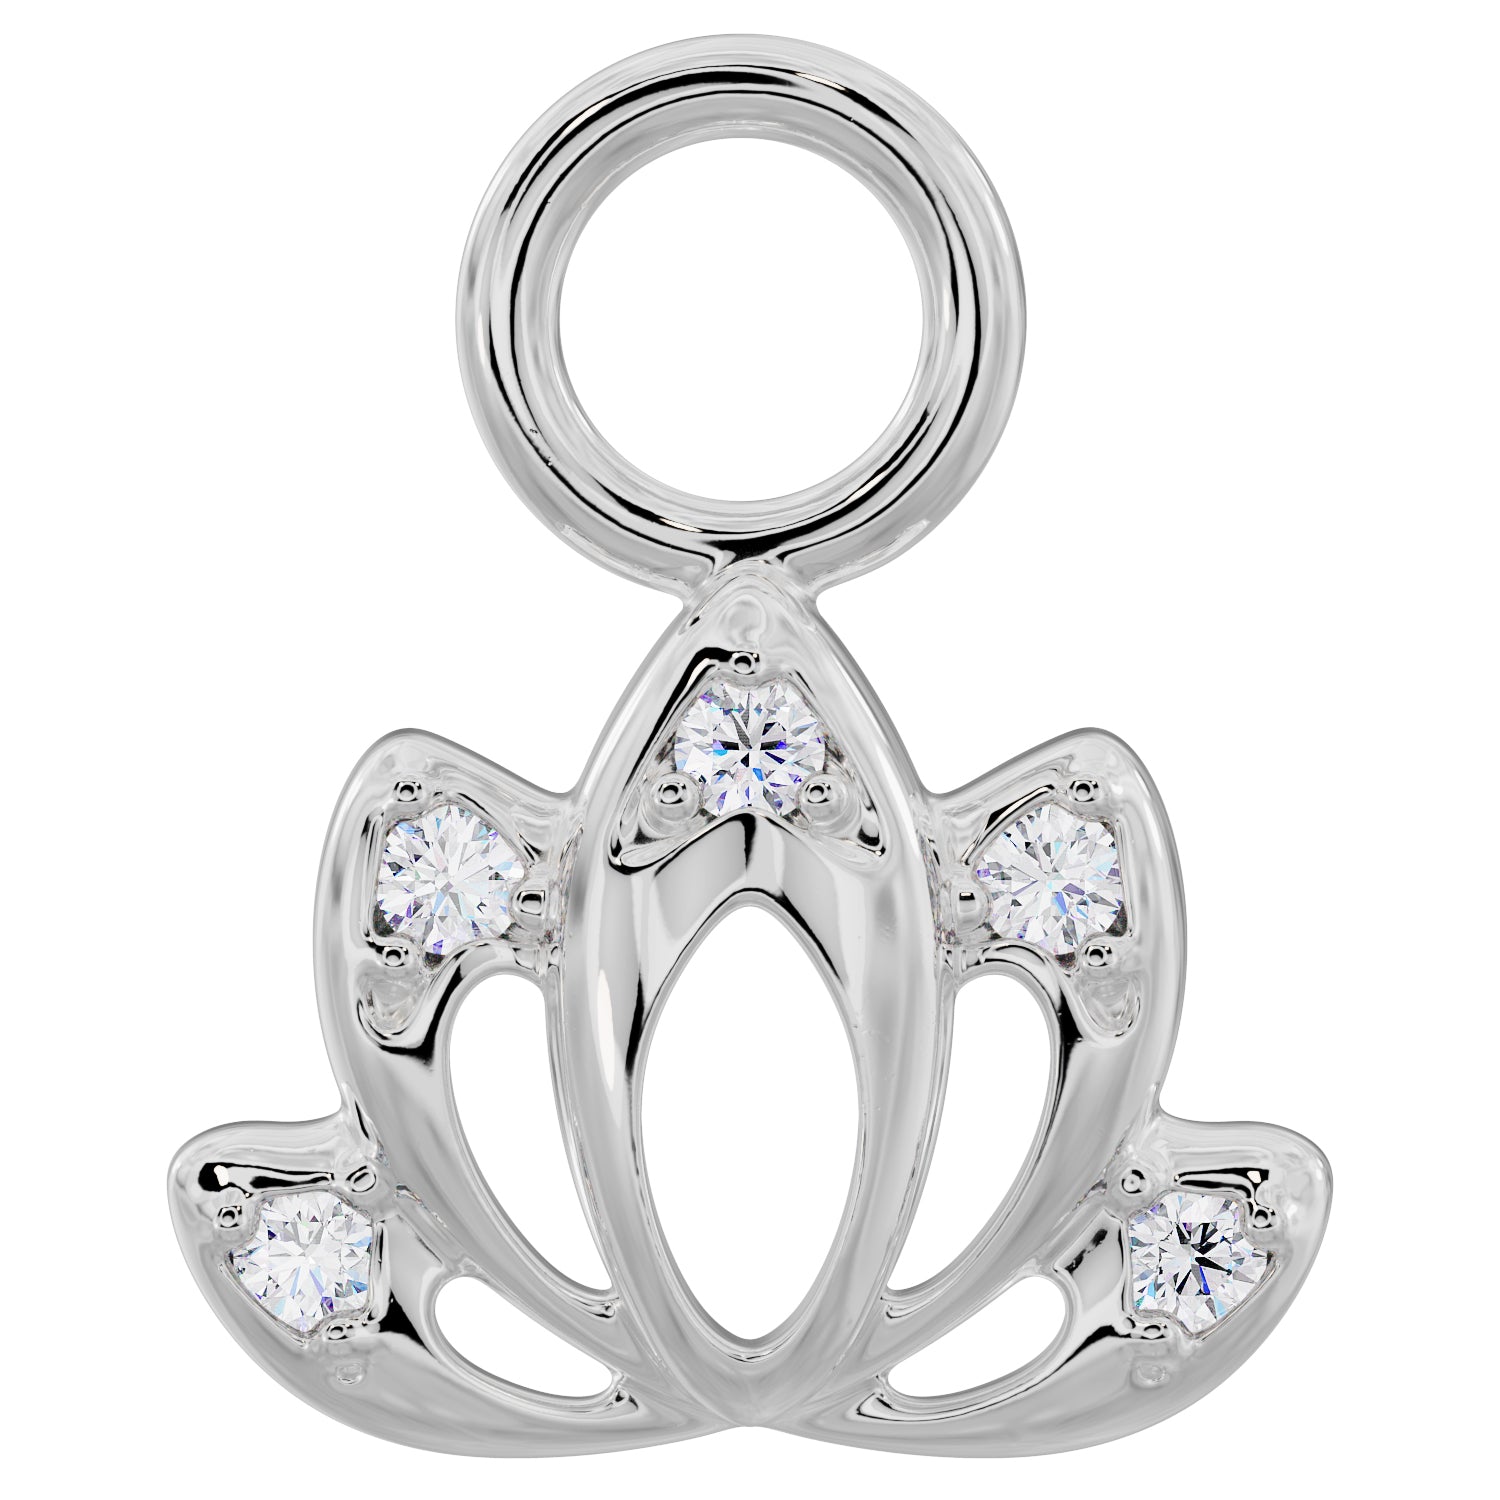 Lotus Diamond Charm Accessory for Piercing Jewelry-14K White Gold